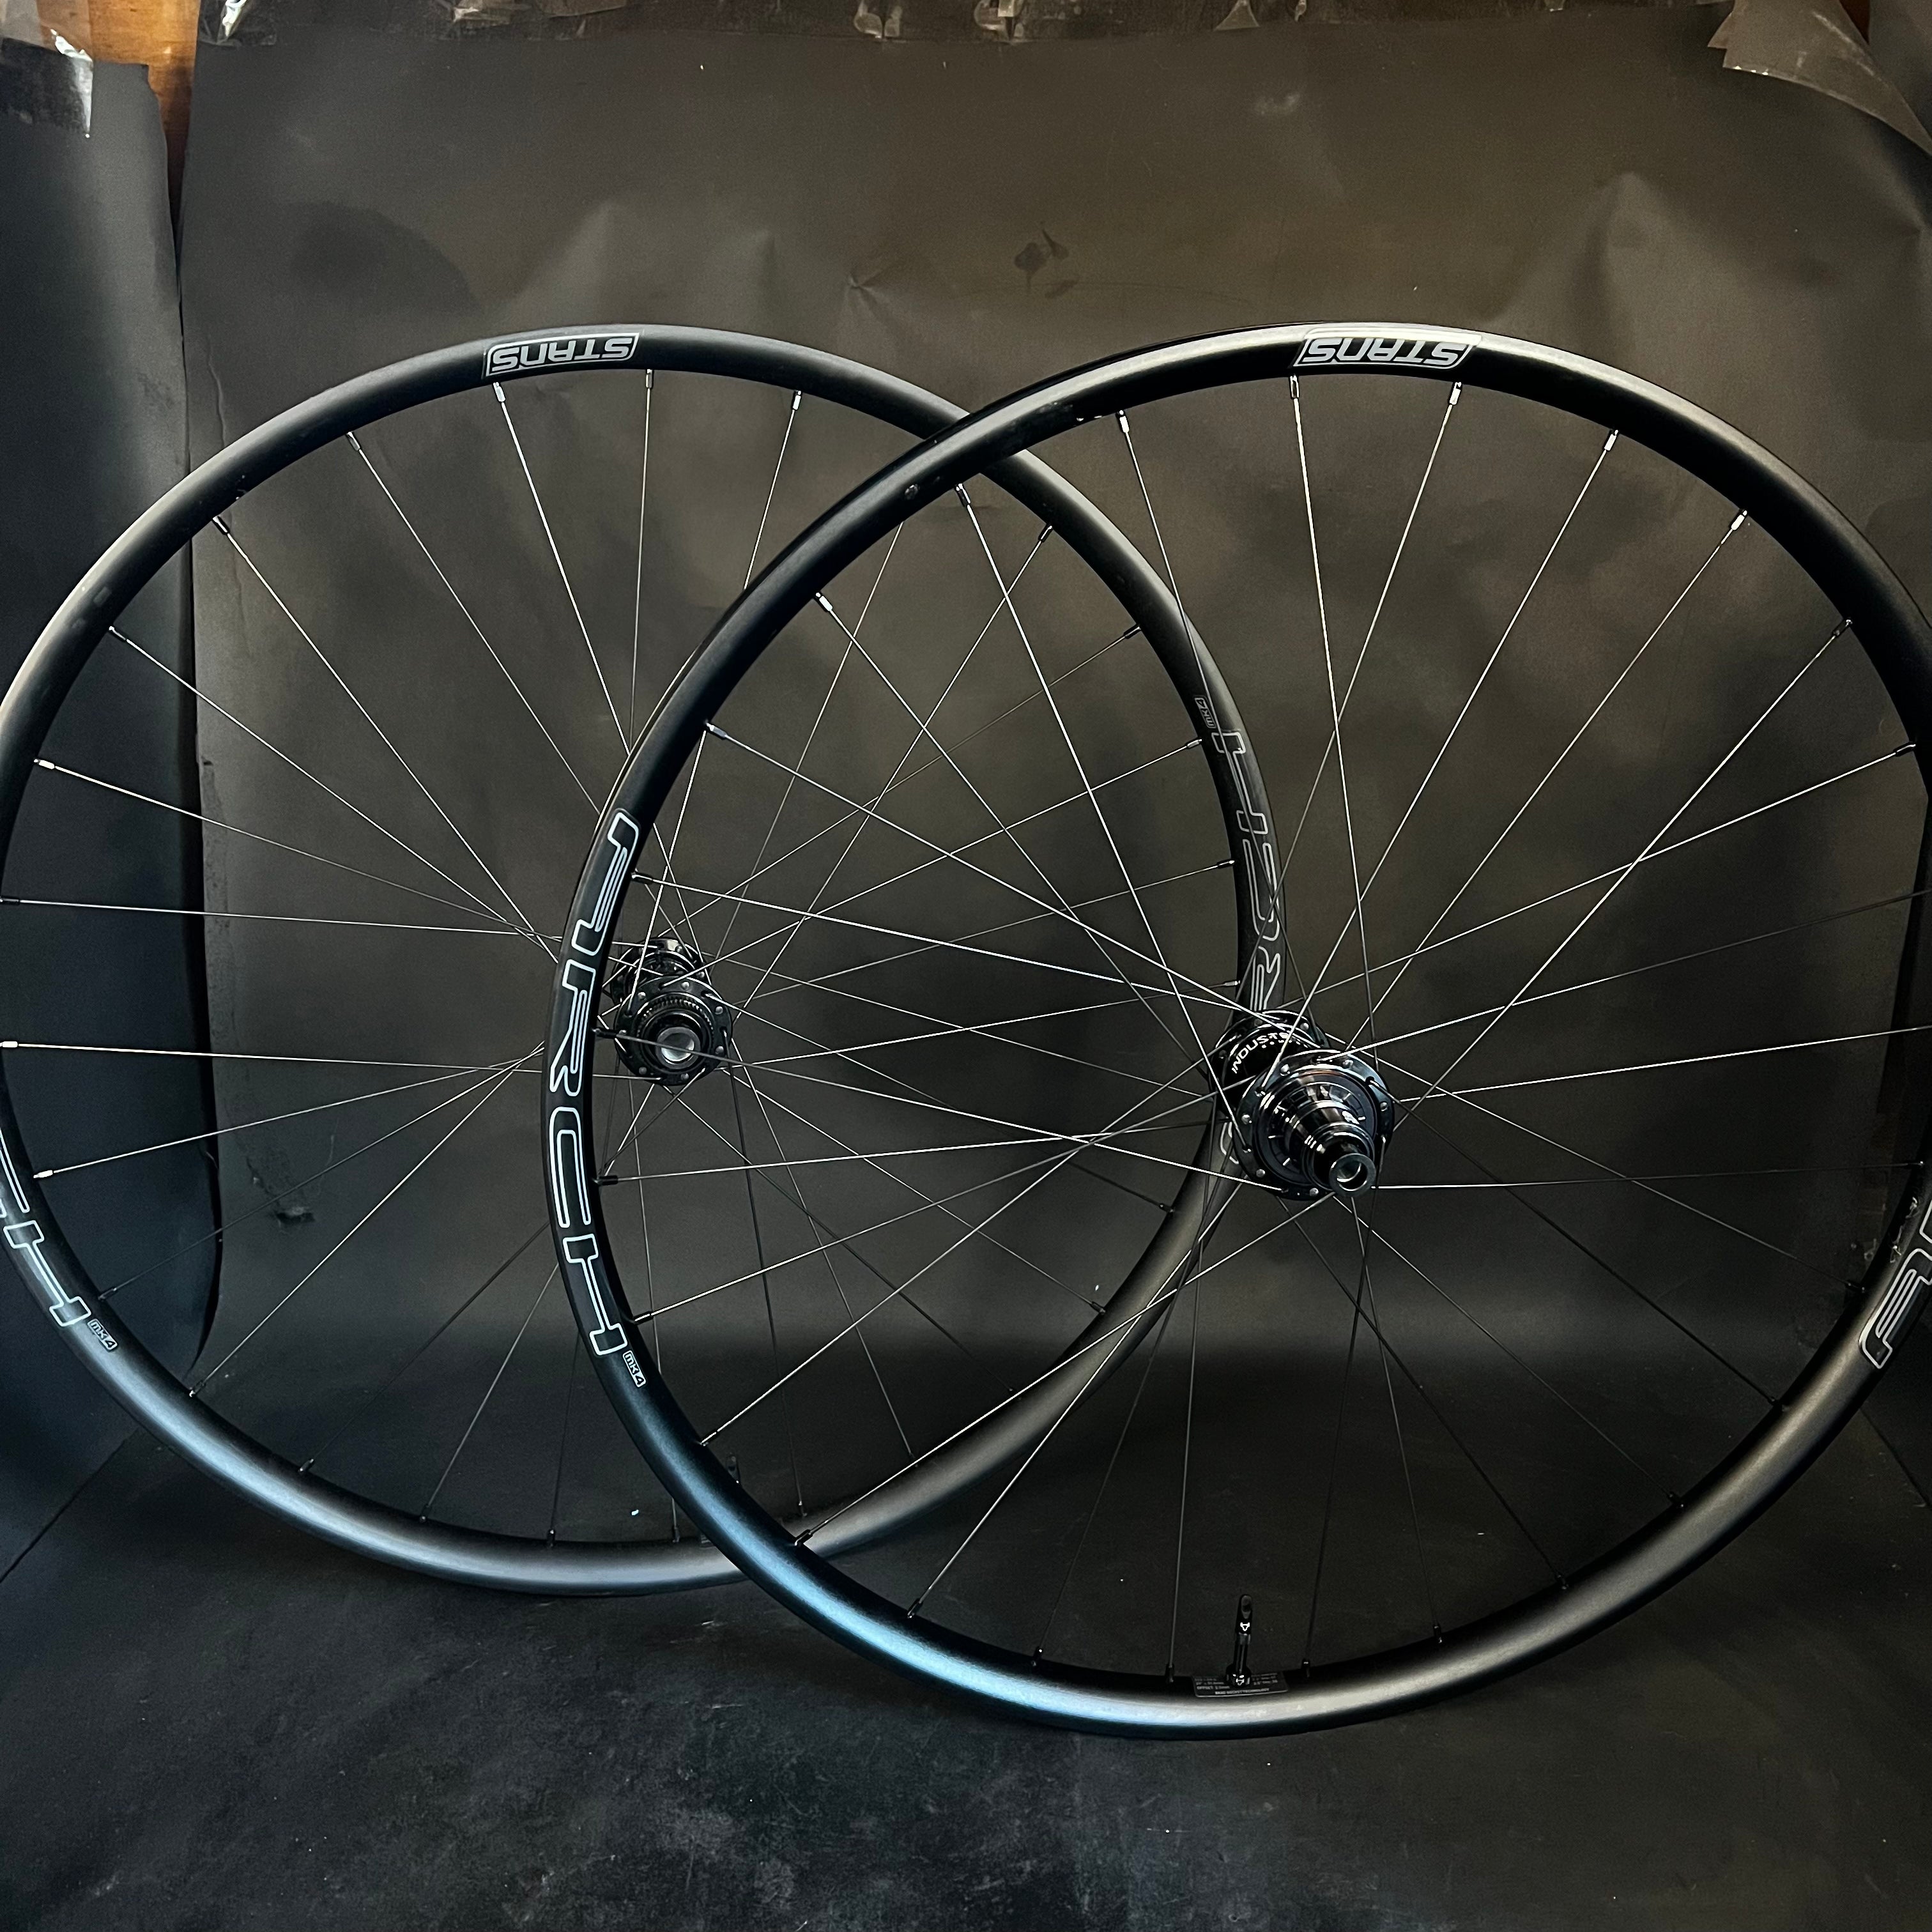 I9 Hydra Boost Cl hubs and 29" Arch MK4 rims